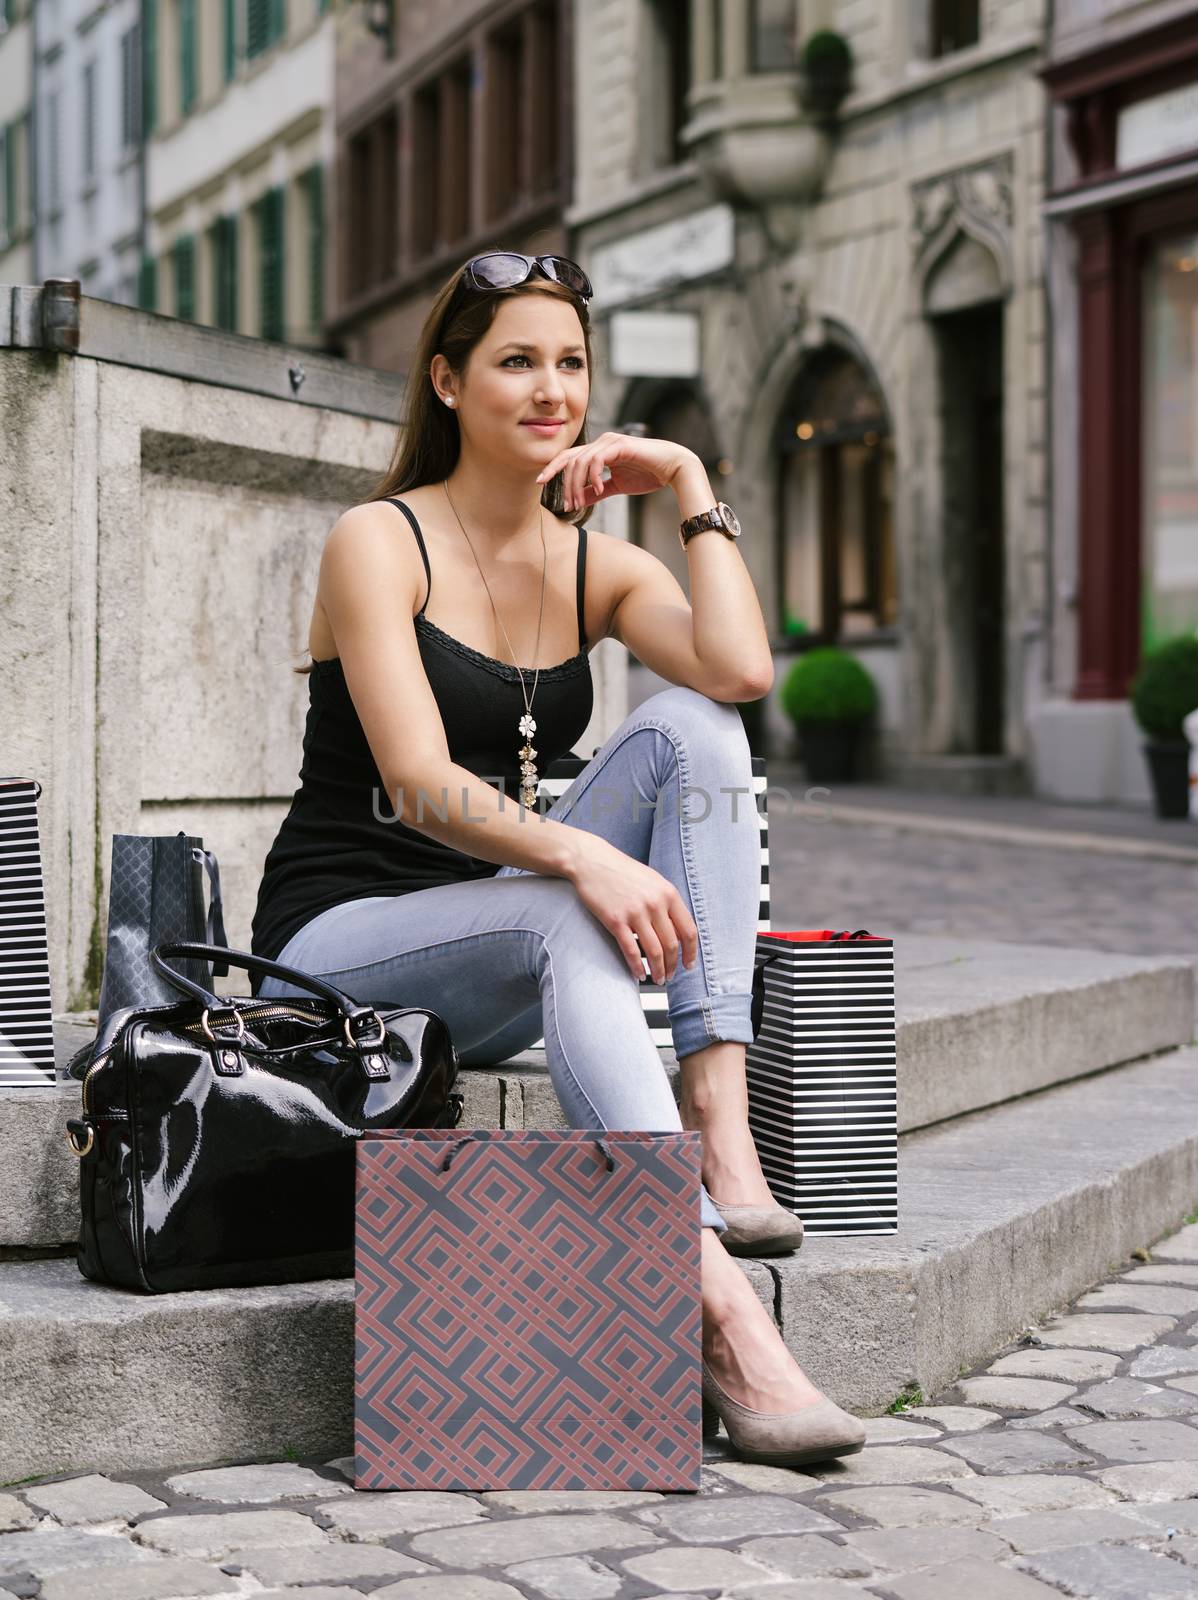 Photo of a beautiful young woman sitting and resting with her shopping bags at a fountain in an old European city.